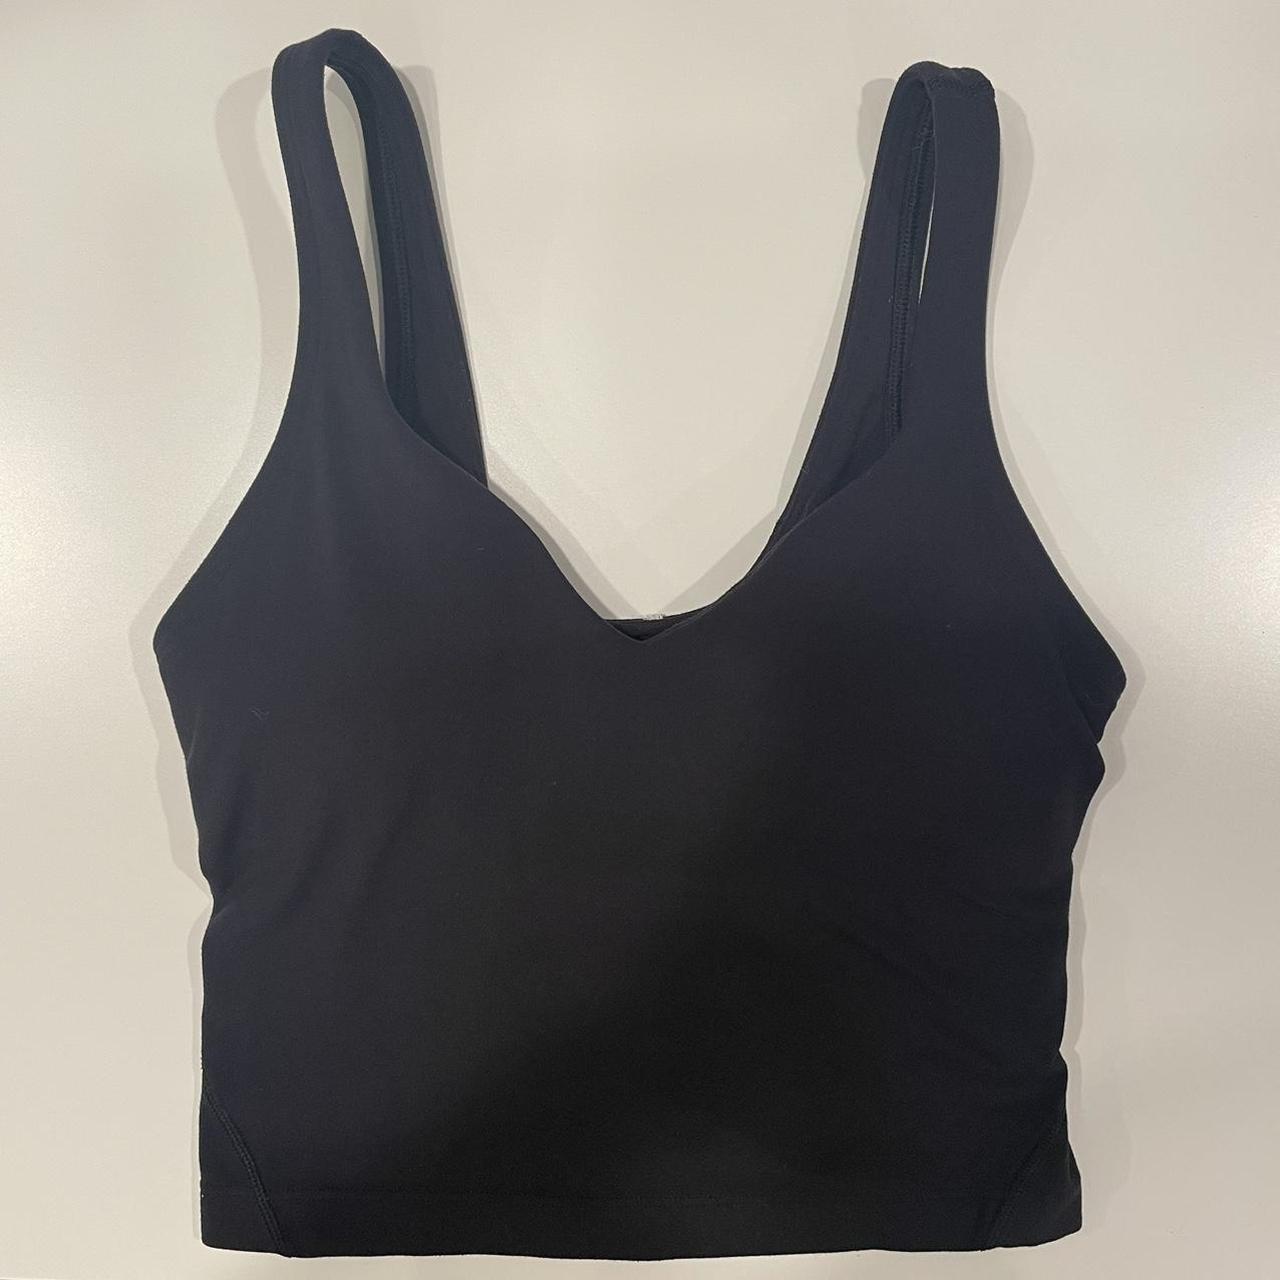 LULULEMON ALIGN CROPPED TANK TOP PERFECT CONDITION... - Depop